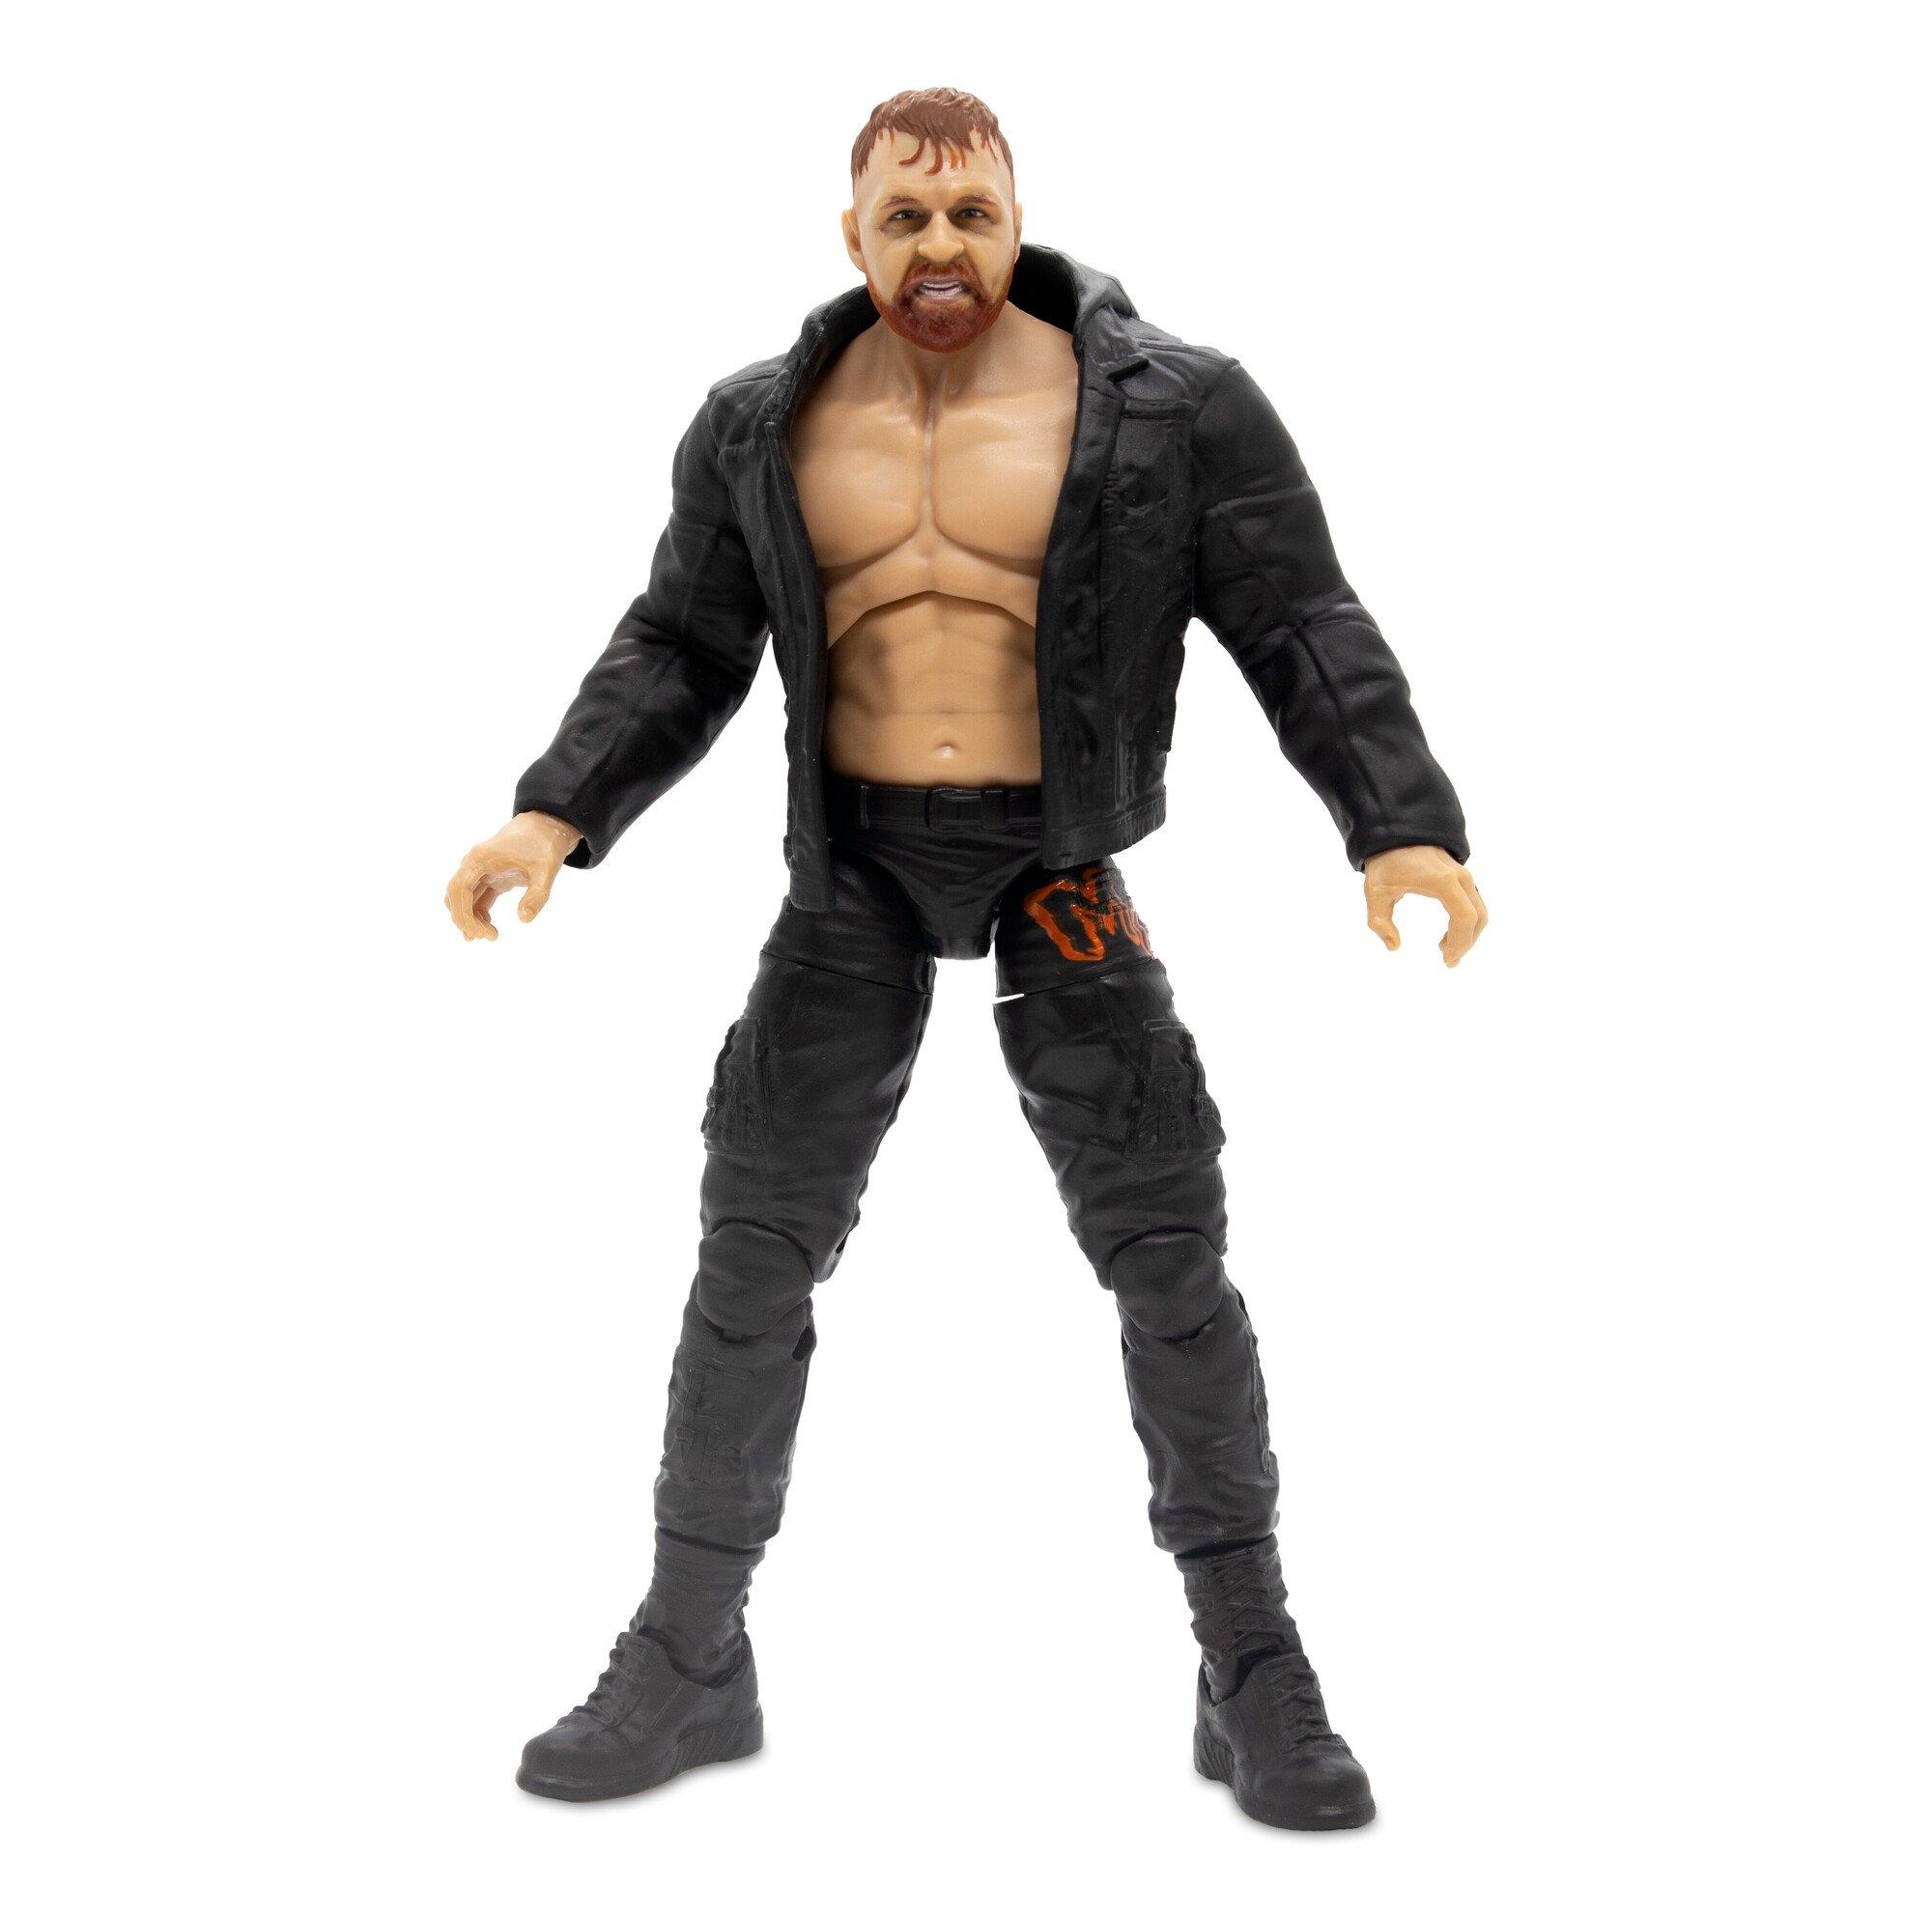 AEW 6 inch All Elite Wrestling Jon Moxley Action Figure AEW0010 for sale online 